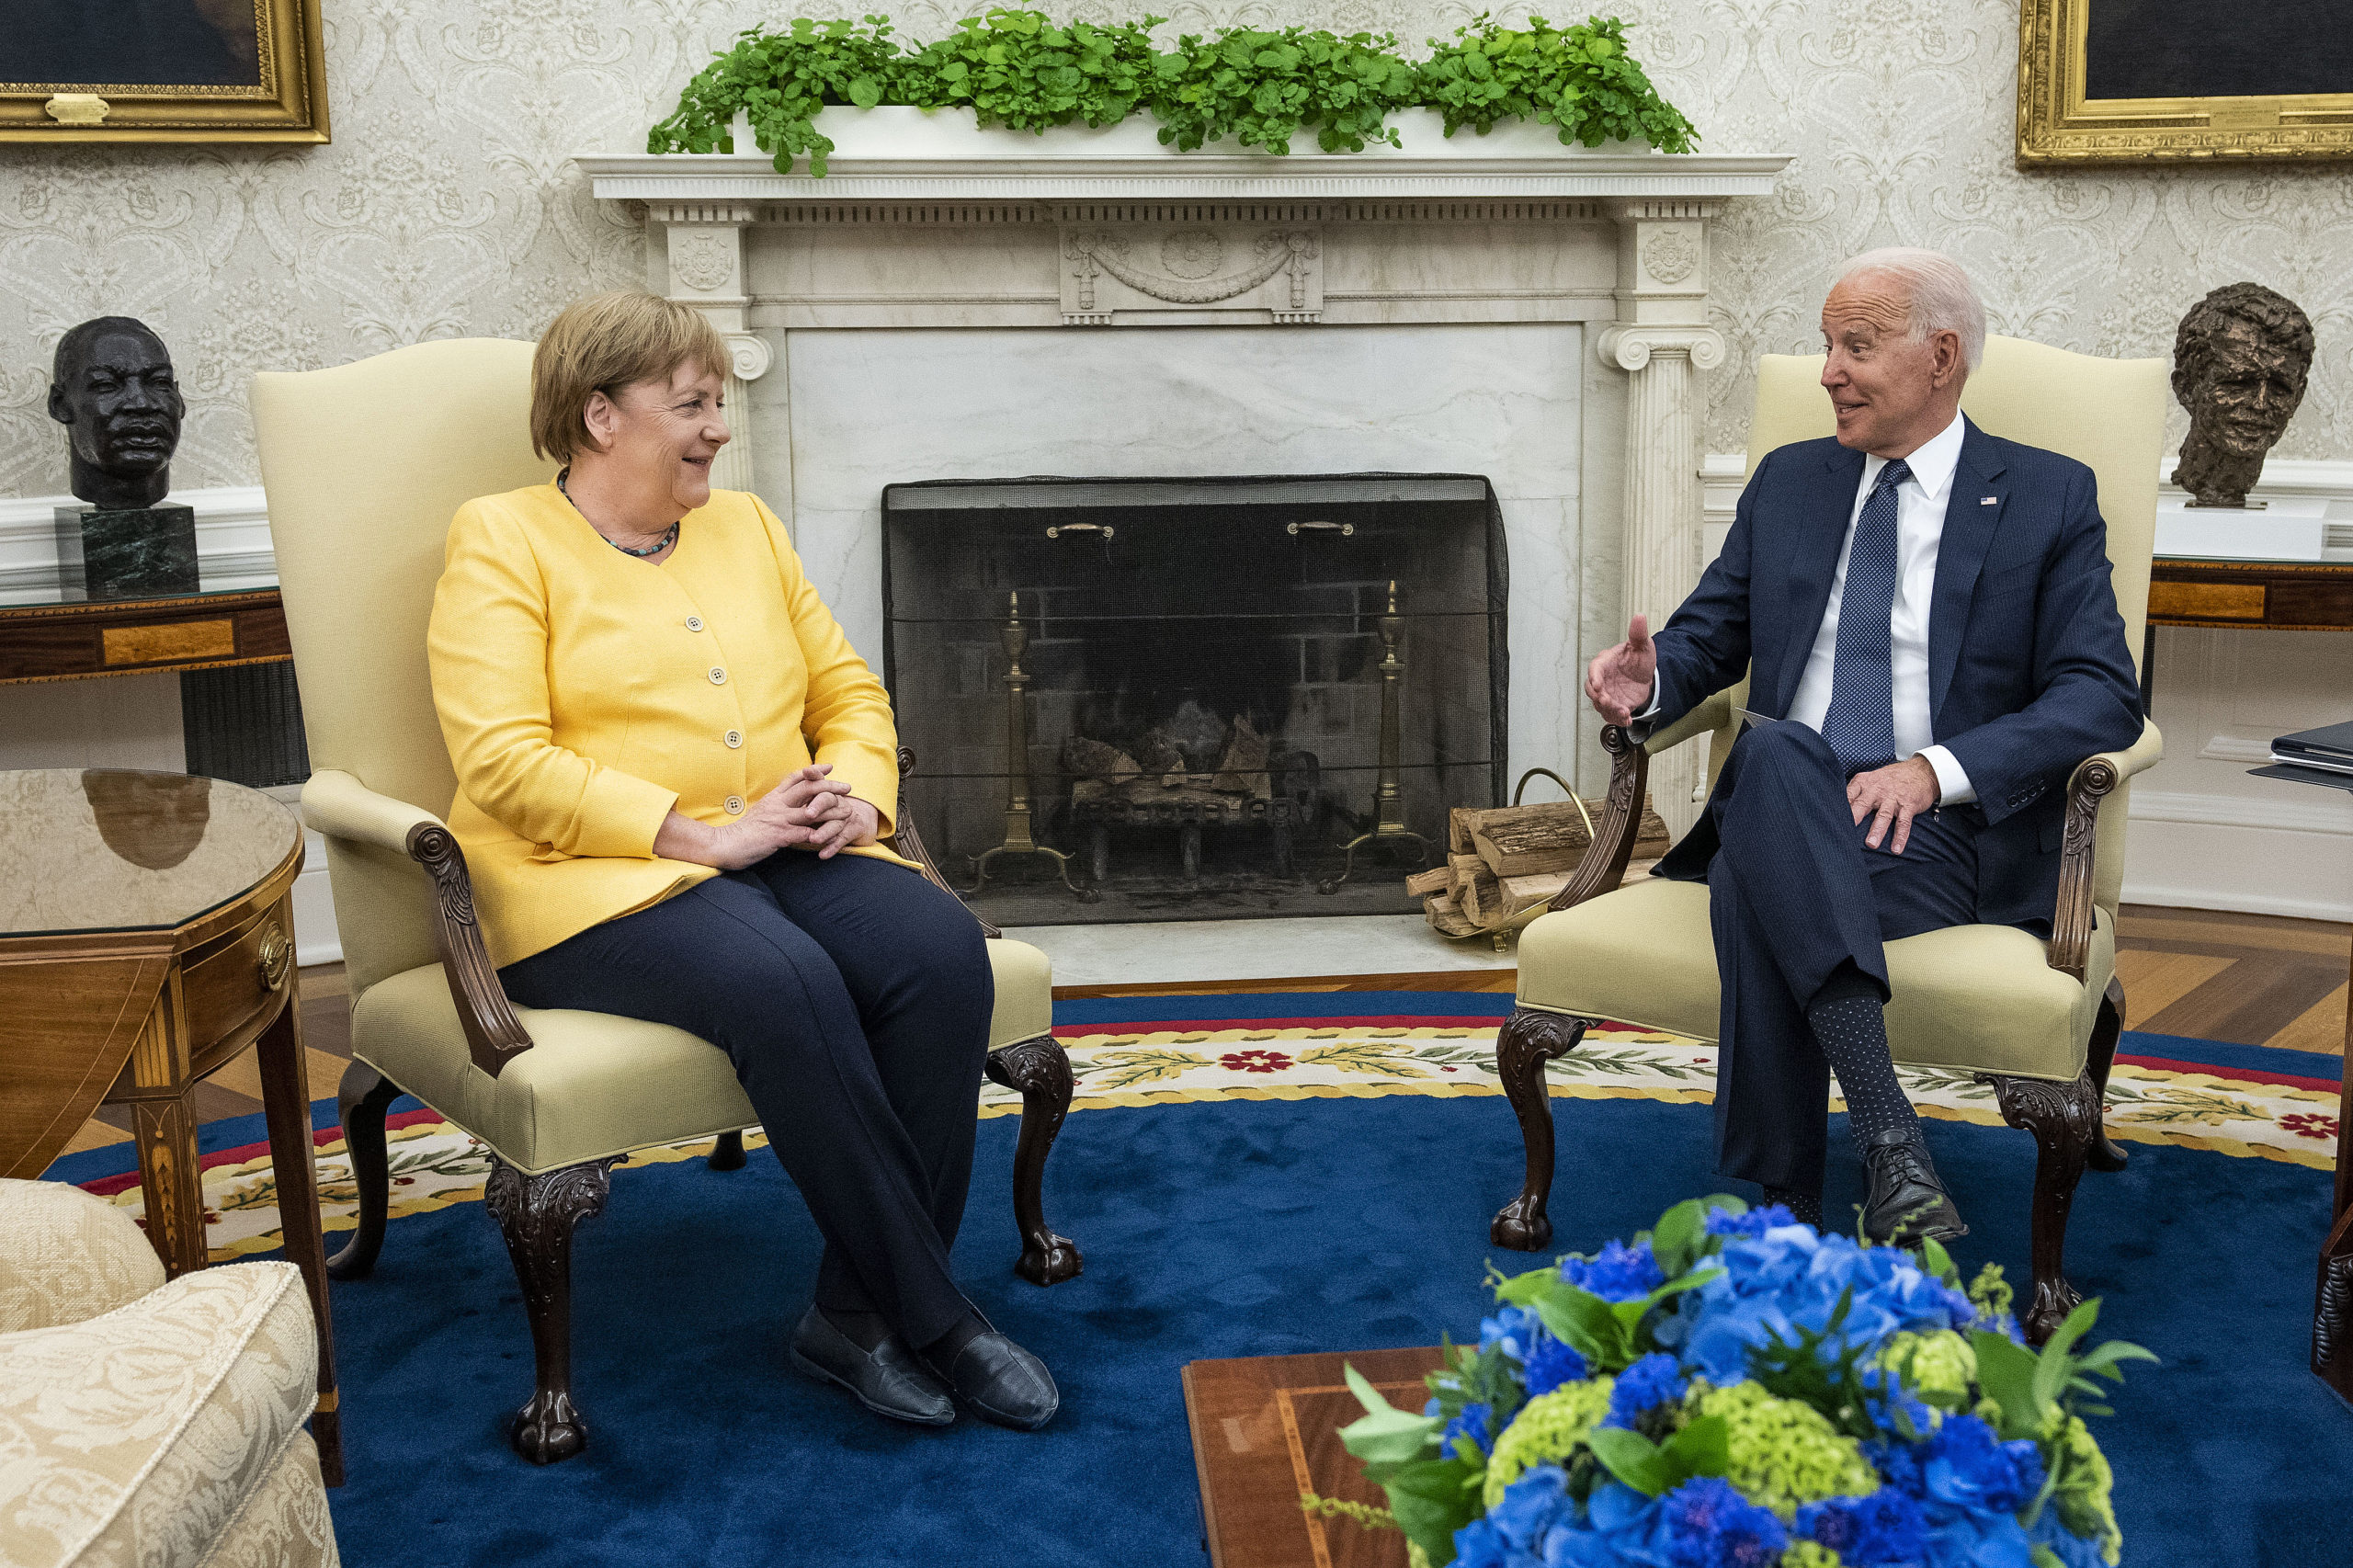 Former German Chancellor Angela Merkel and President Joe Biden make brief remarks to the press before a meeting on July 15. (Doug Mills/Pool/Getty Images)